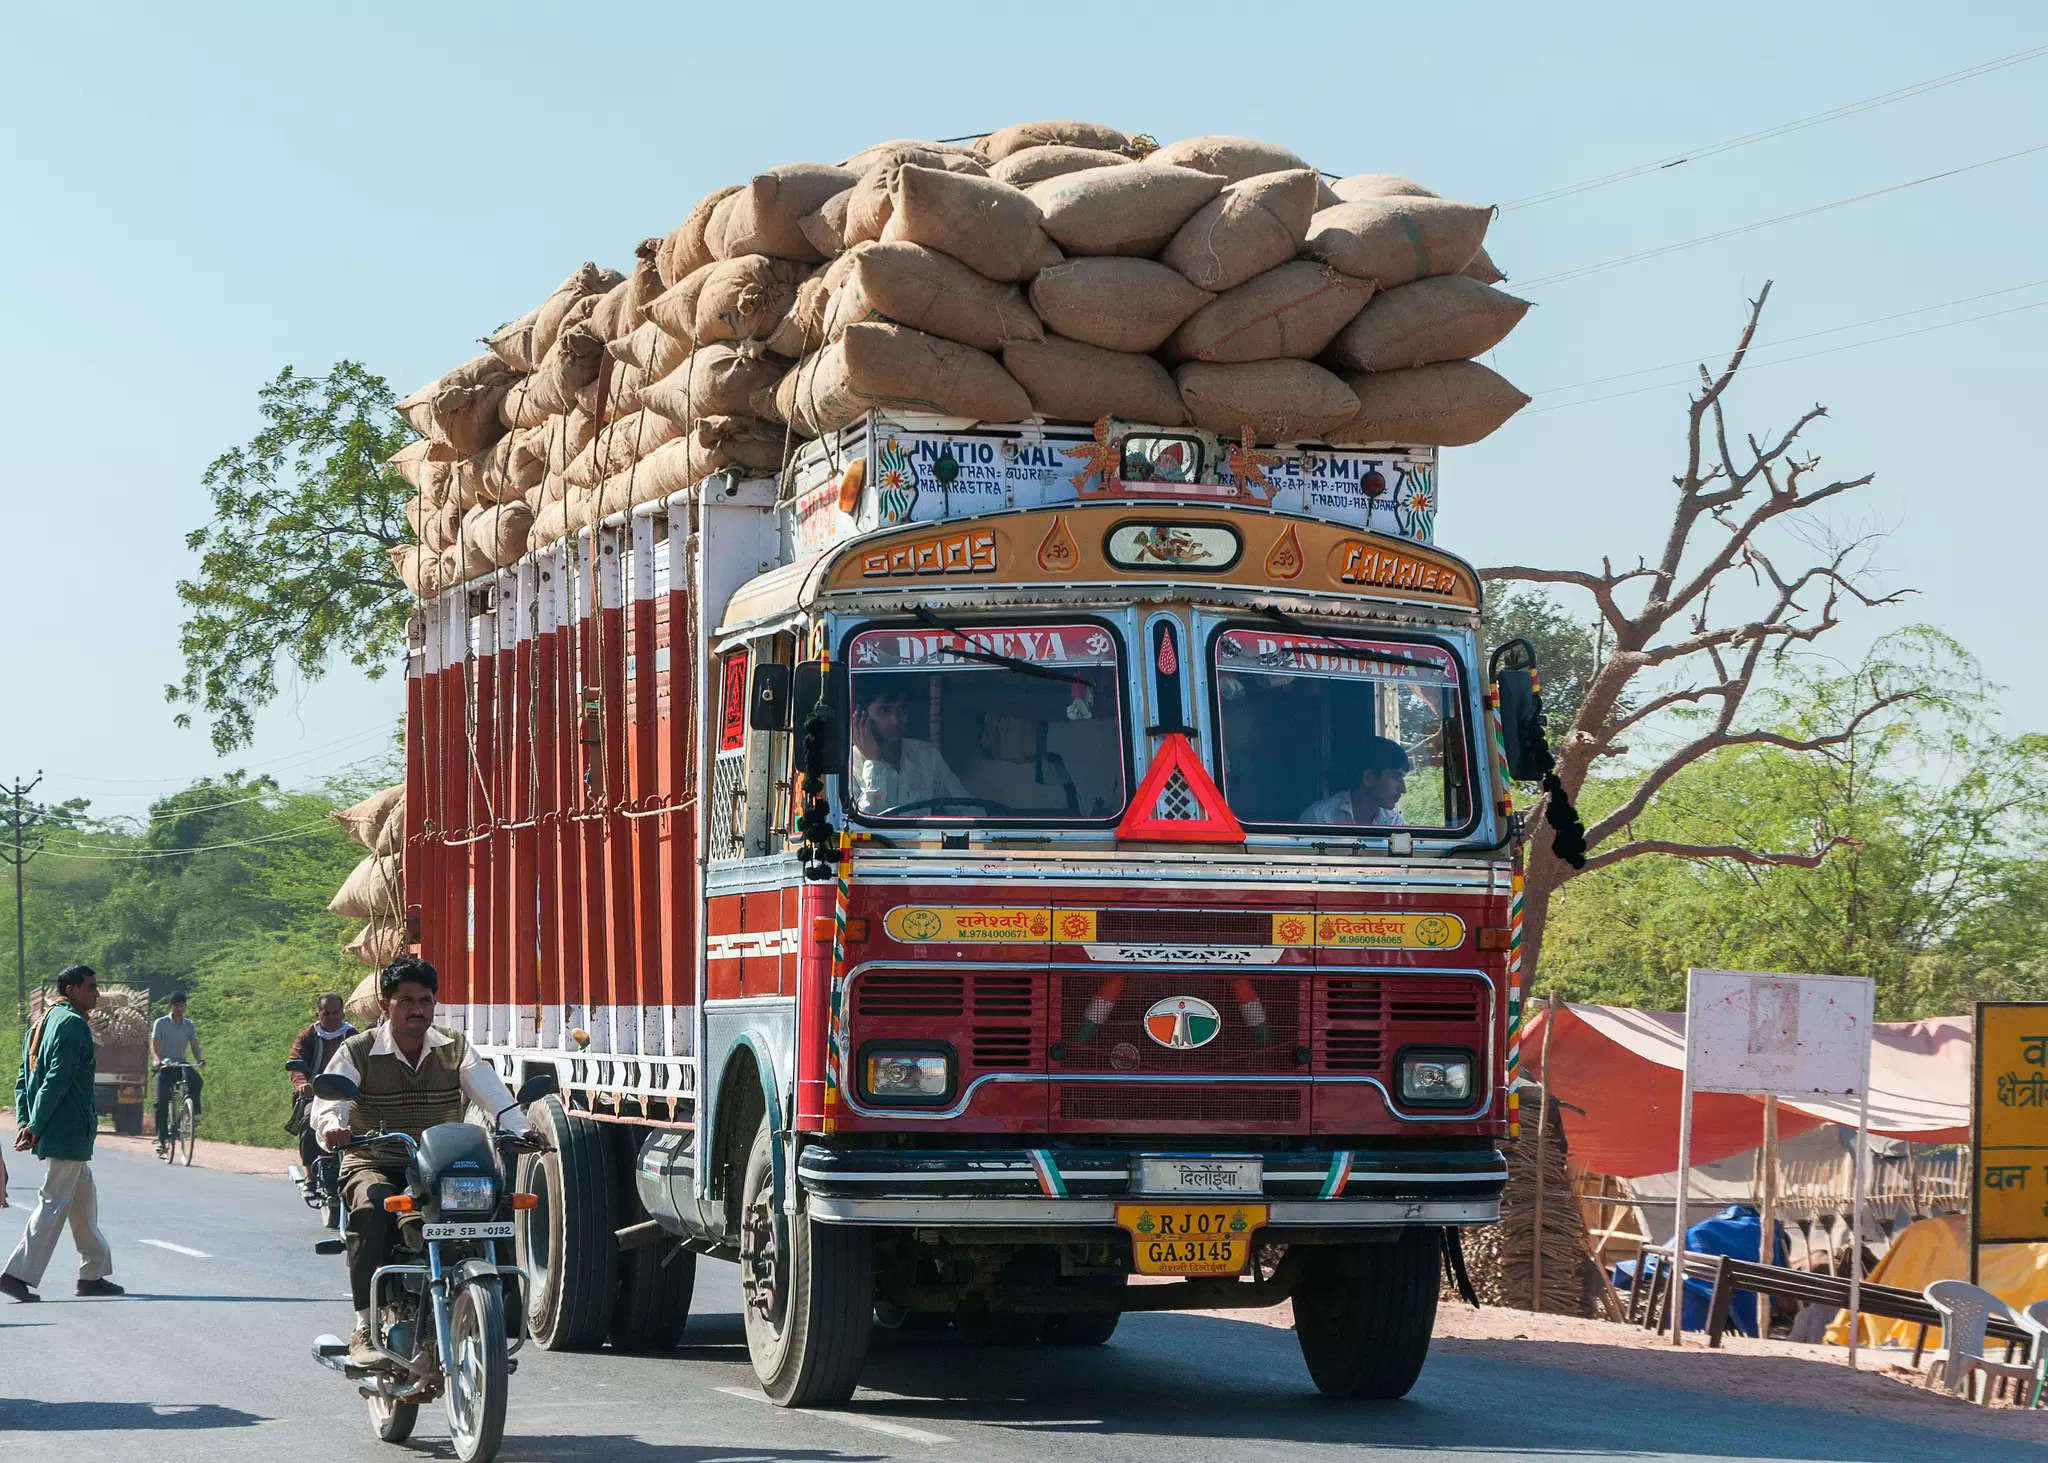 For the first time ever, overloading of trucks has attracted such huge fines, officials said.